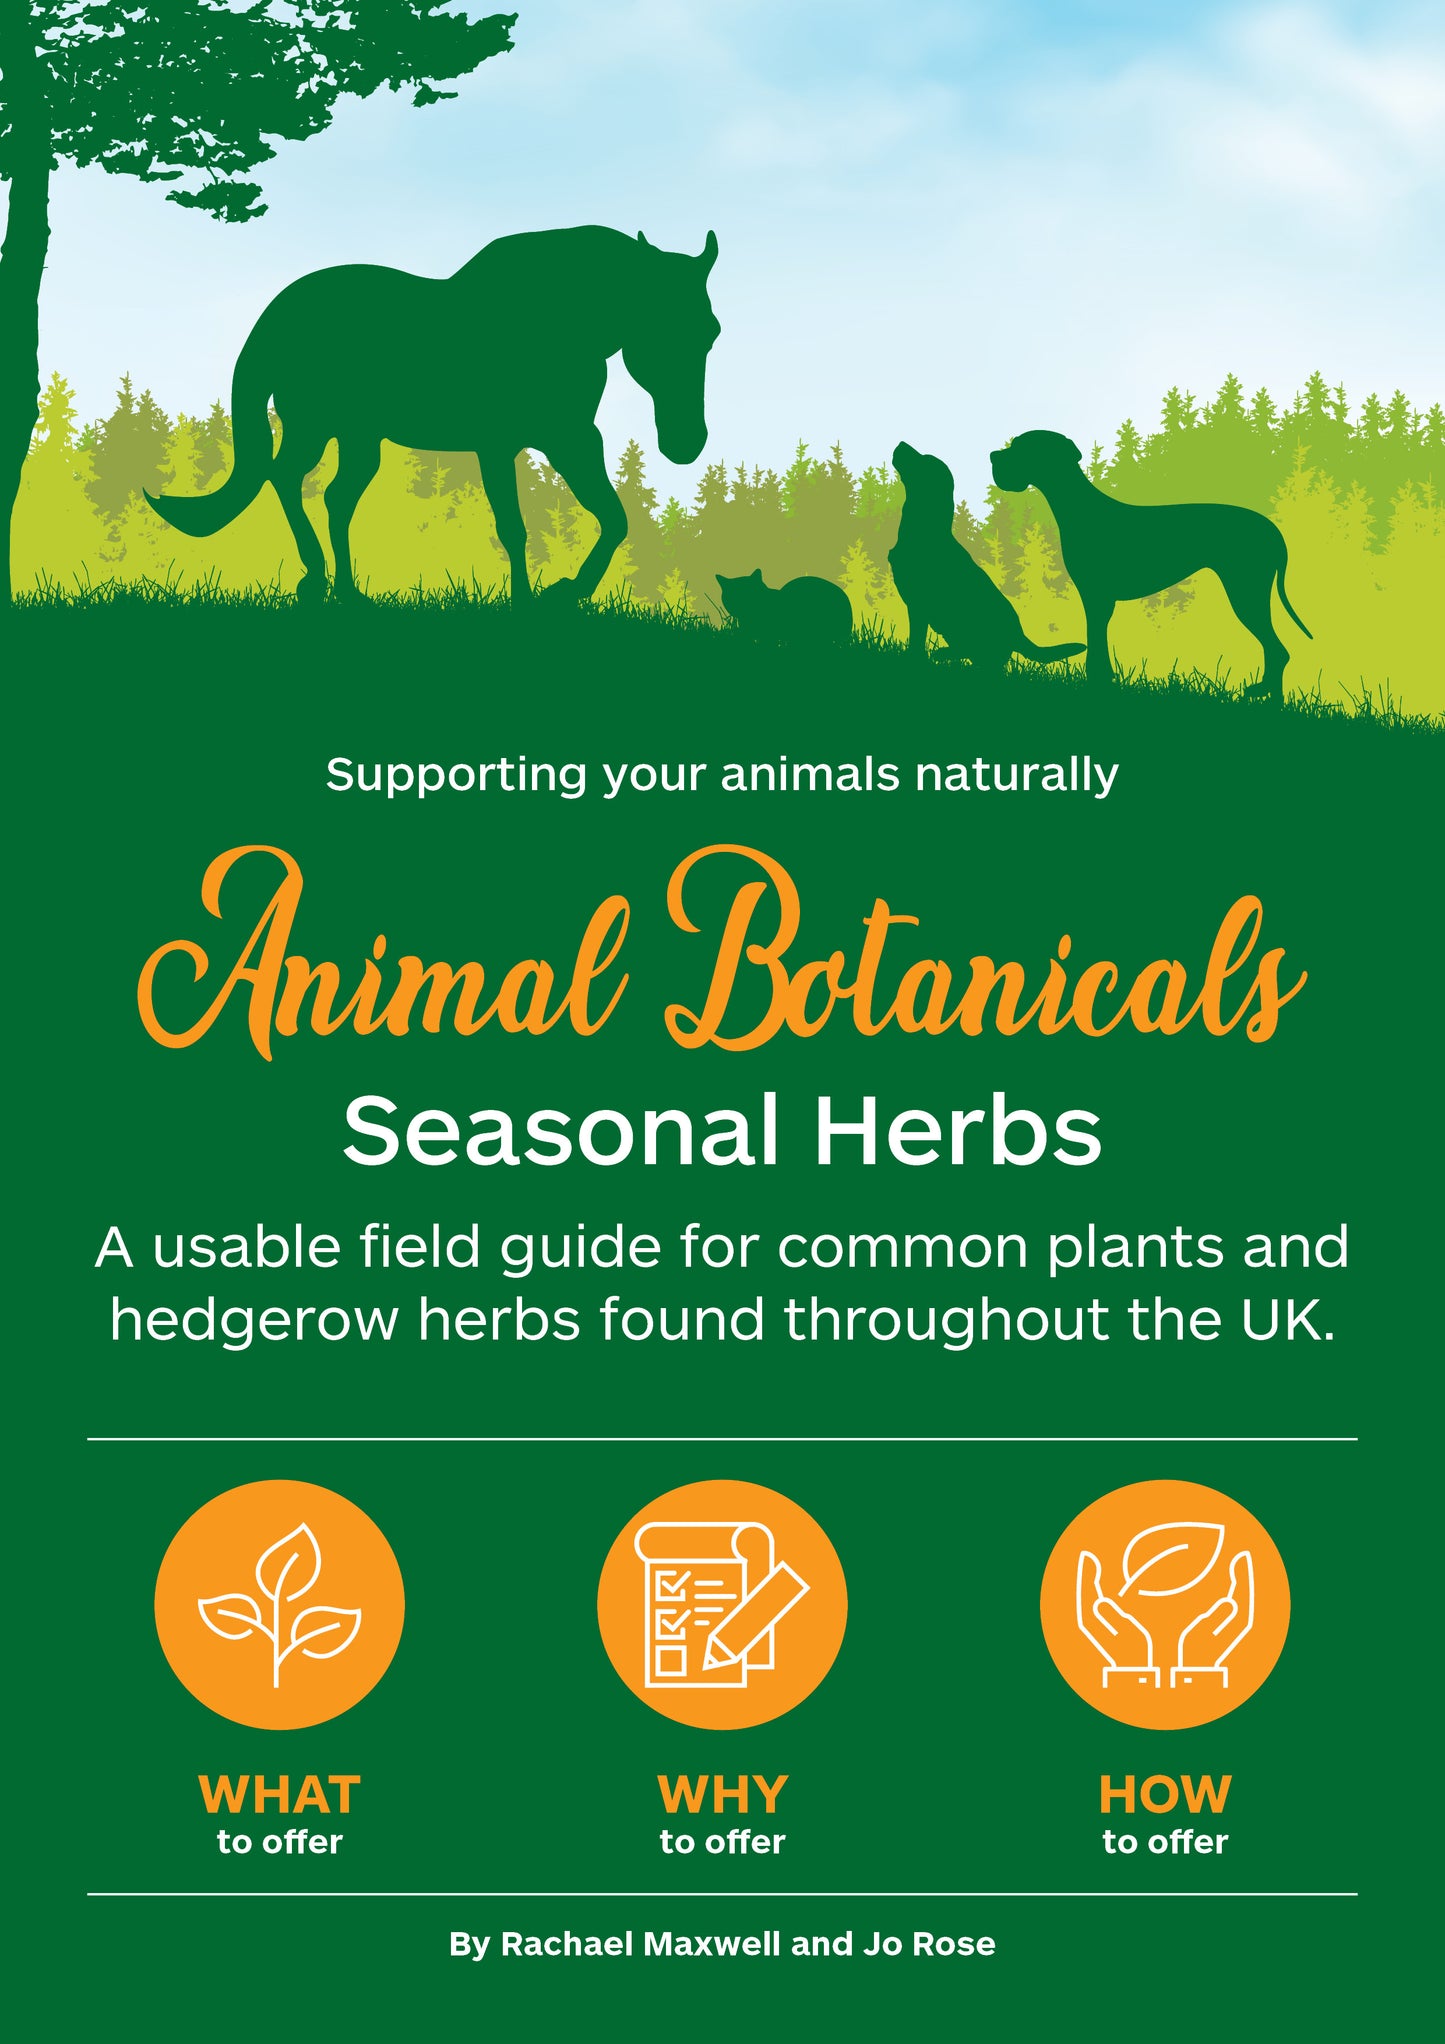 Animal Botanicals: A field guide for common plants and hedgerow herbs found throughout the UK. PURCHASE VIA AMAZON ON THE BELOW LINK